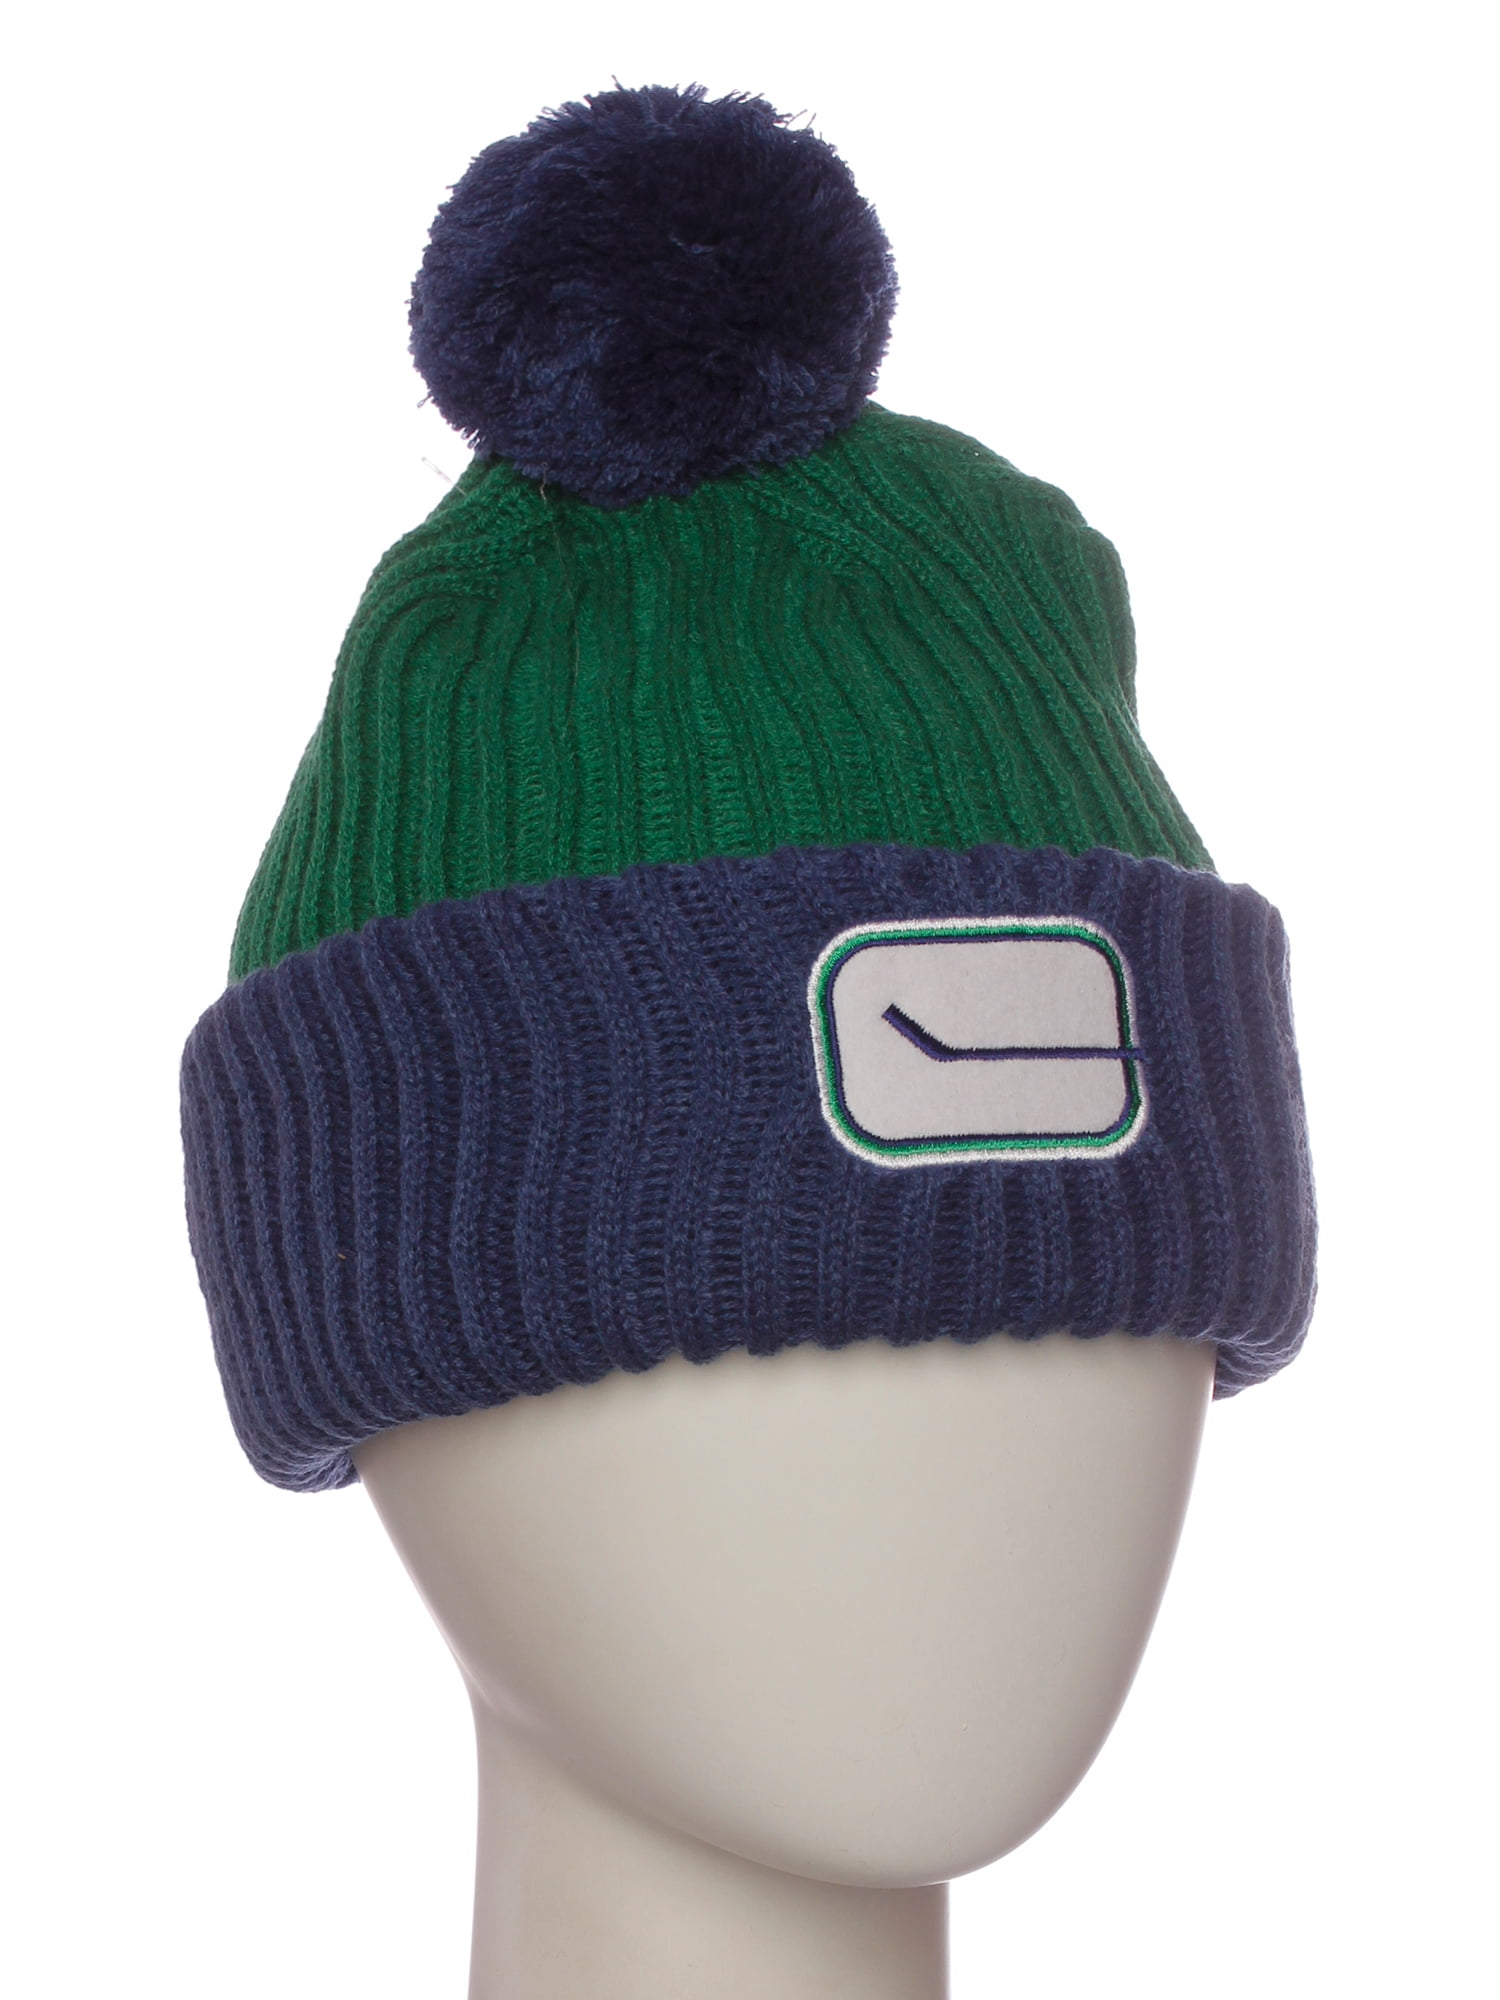 whalers winter hat